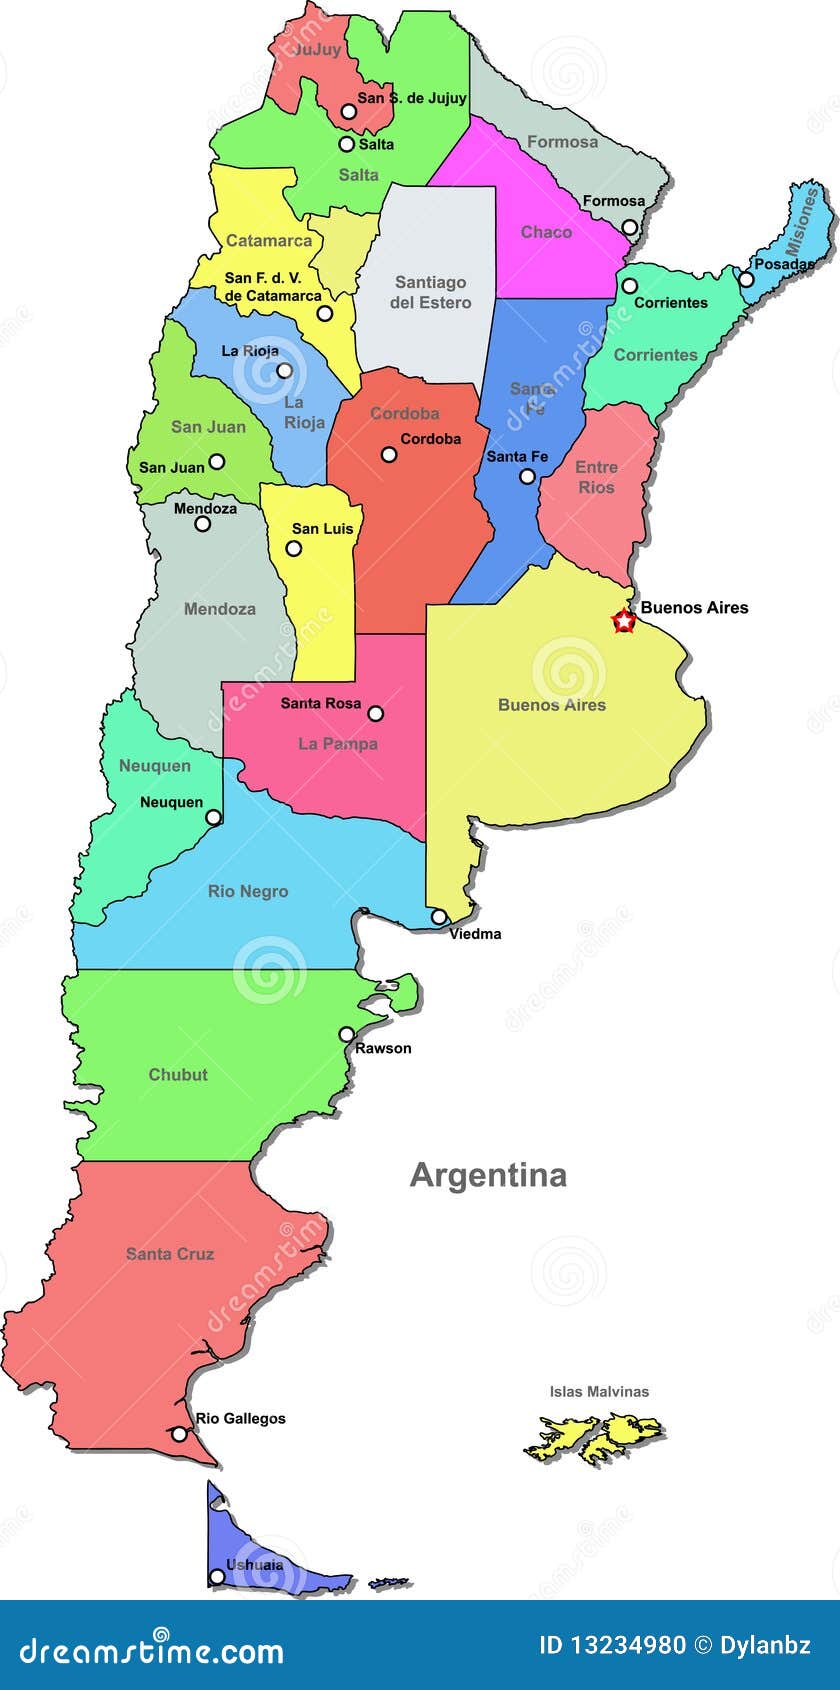 clipart map of argentina - photo #30